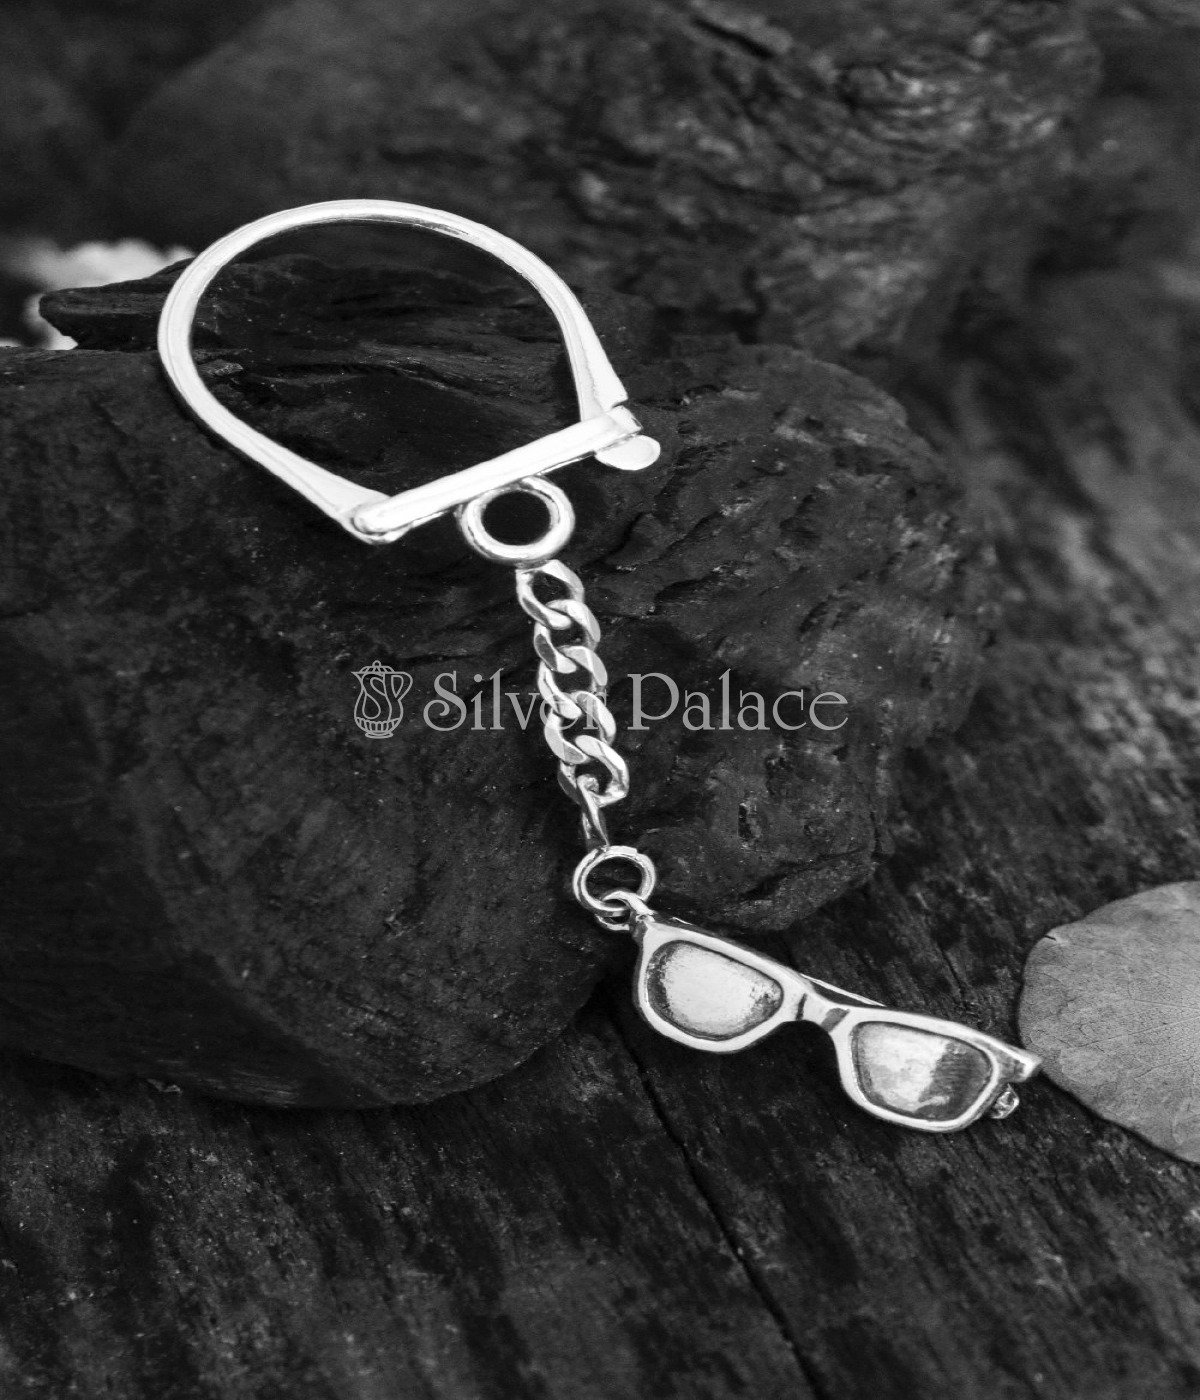 92.5 OXIDISED SILVER COOLERS DESIGN KEYCHAIN